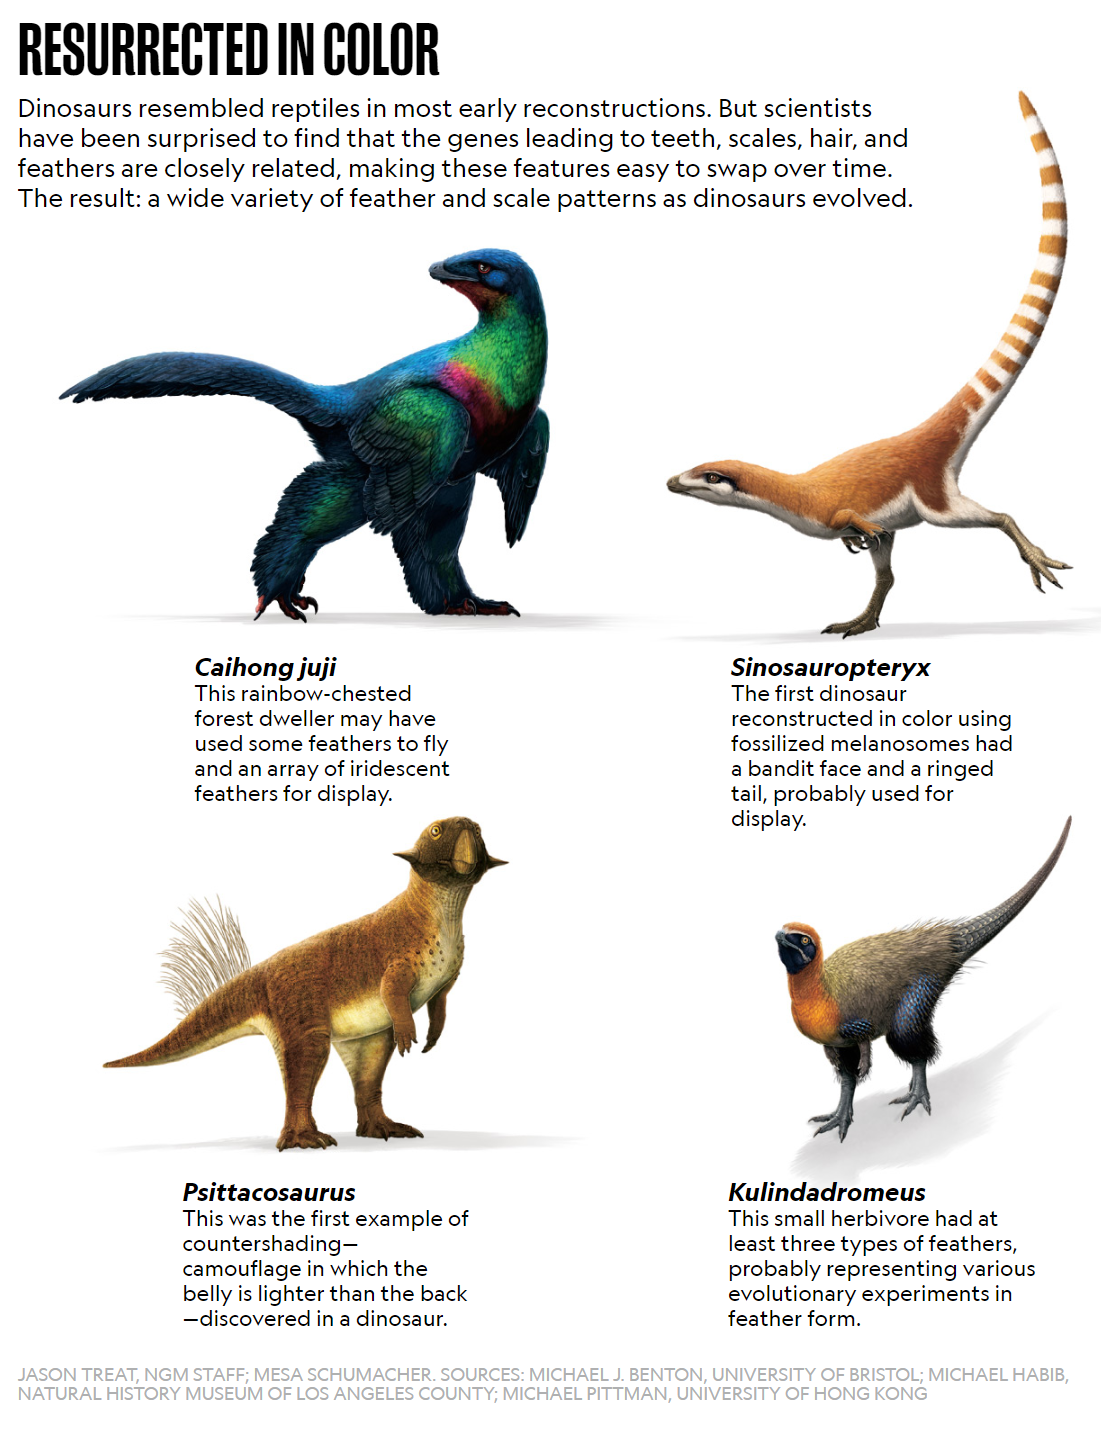 four dinosaurs covered in feathers